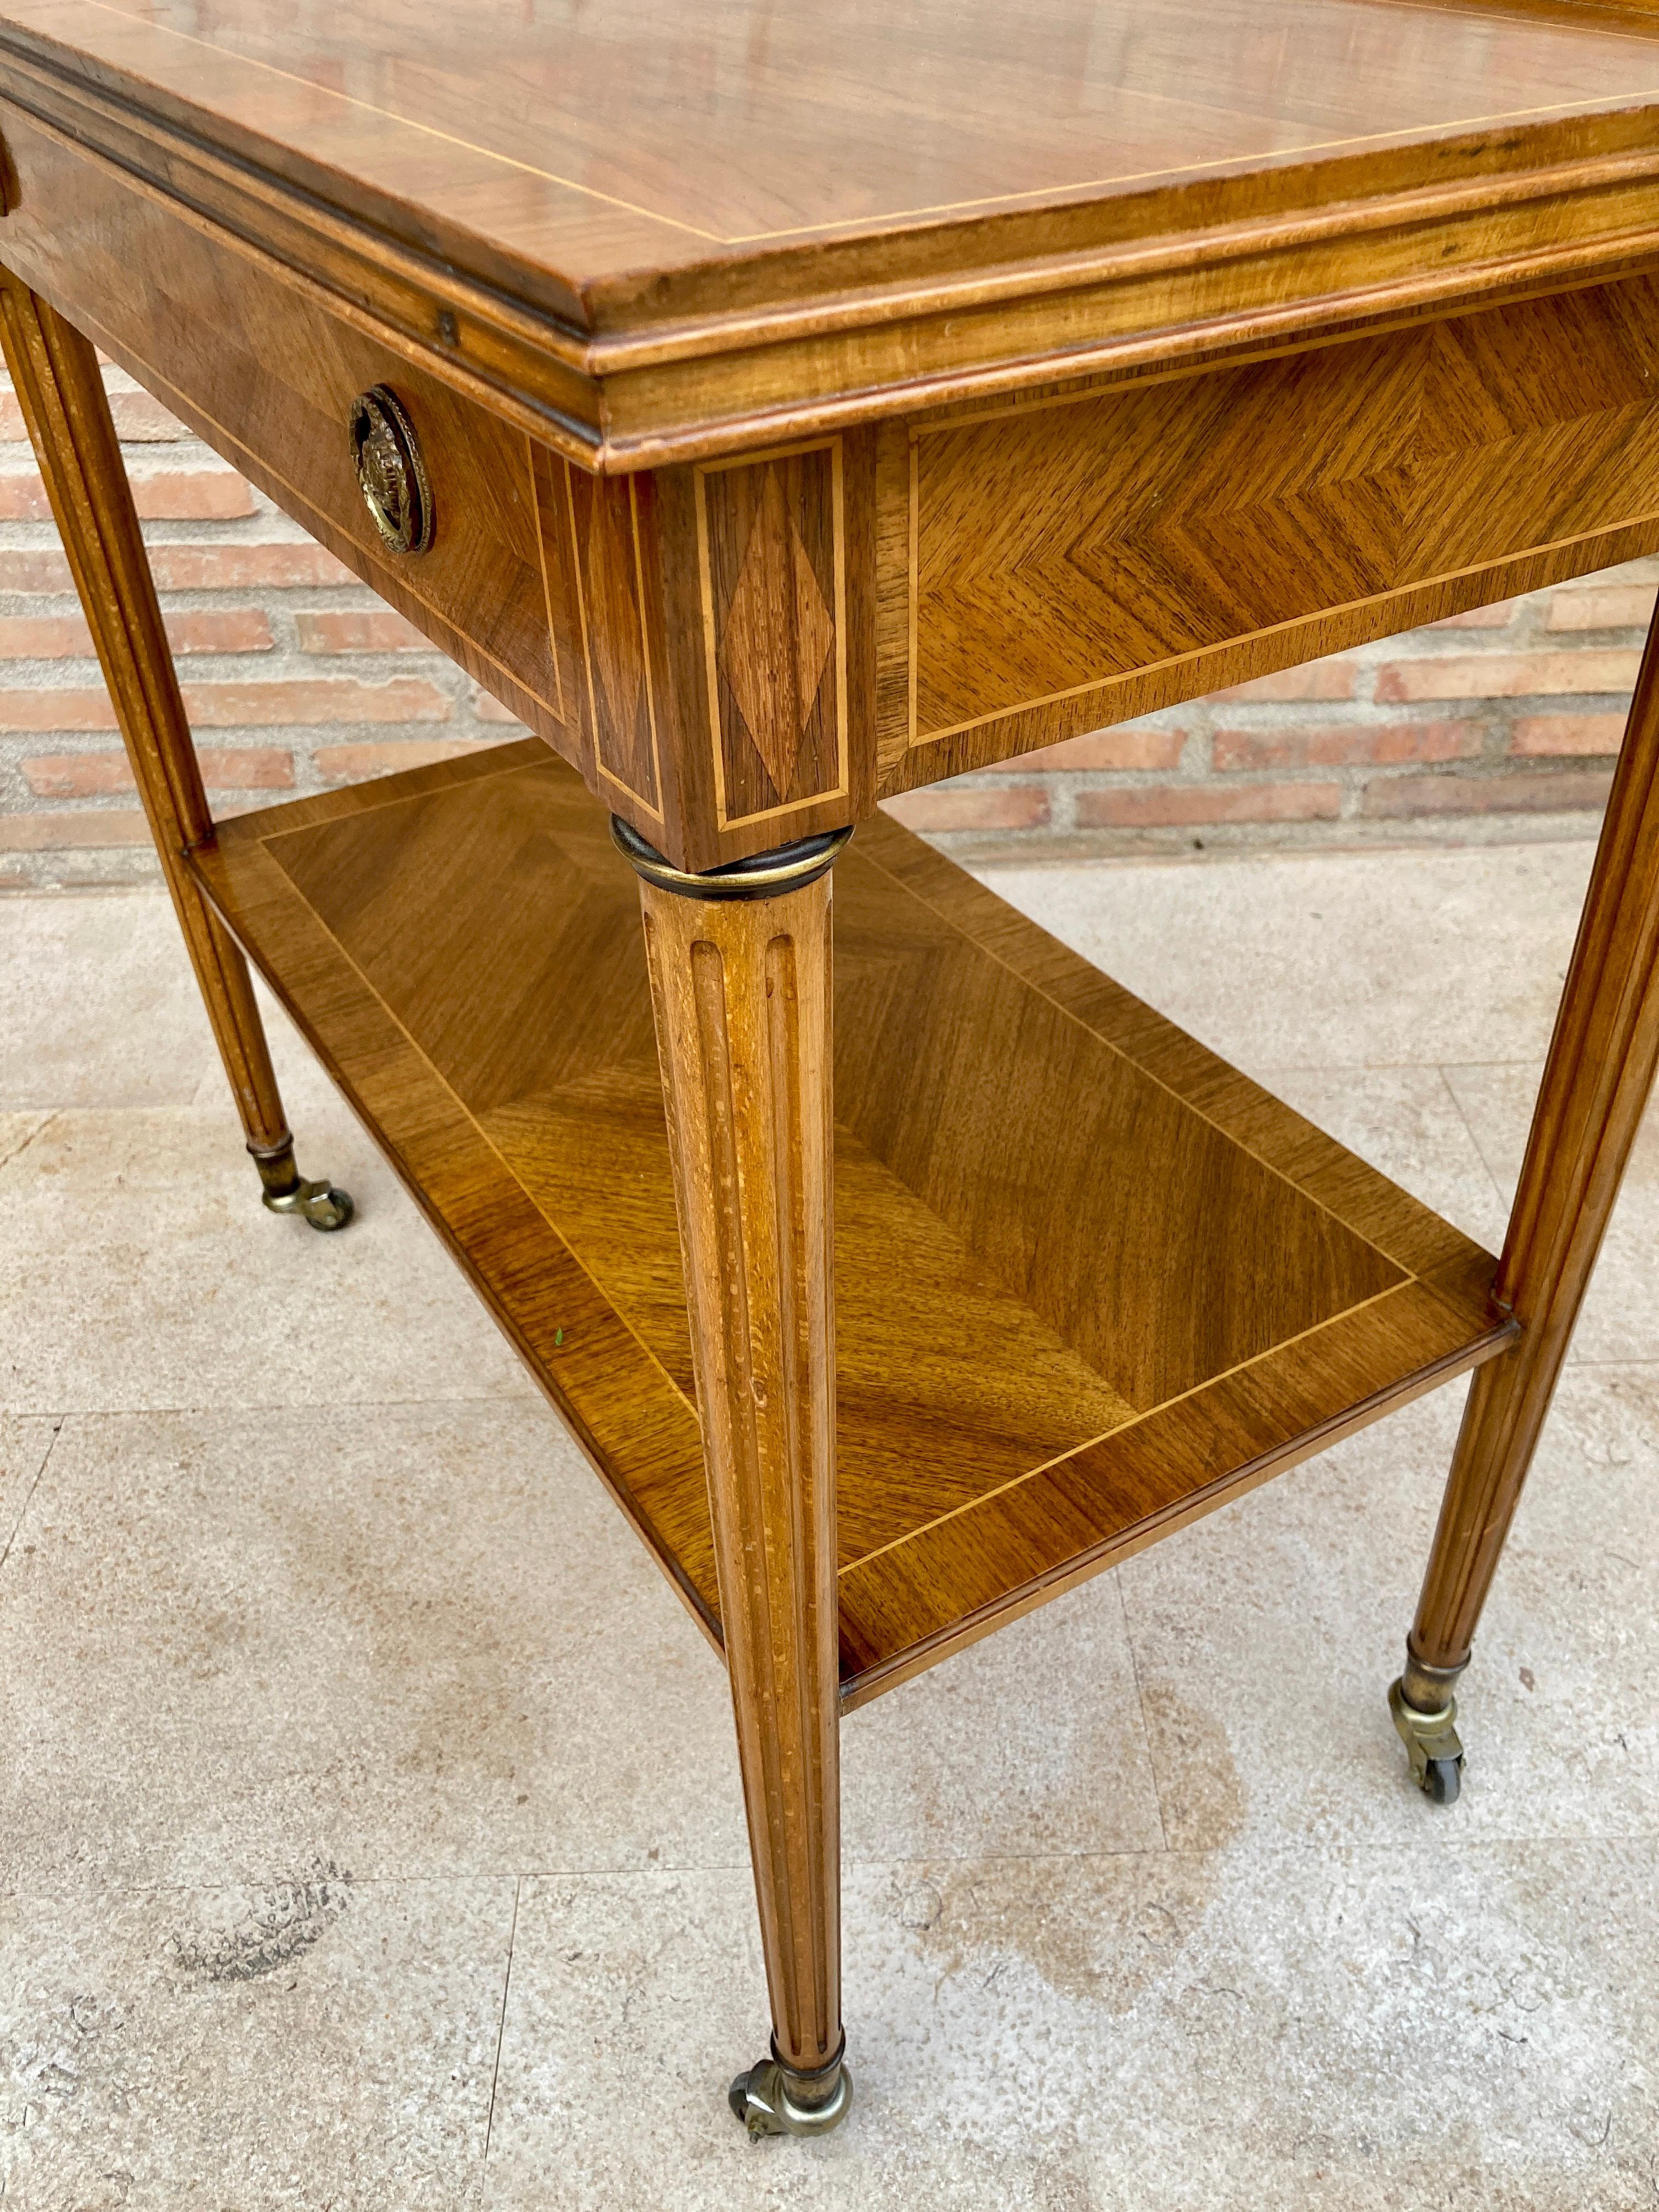 Neoclassic French Marquetry Side Table With One Drawer And Wheels 1940s For Sale 7